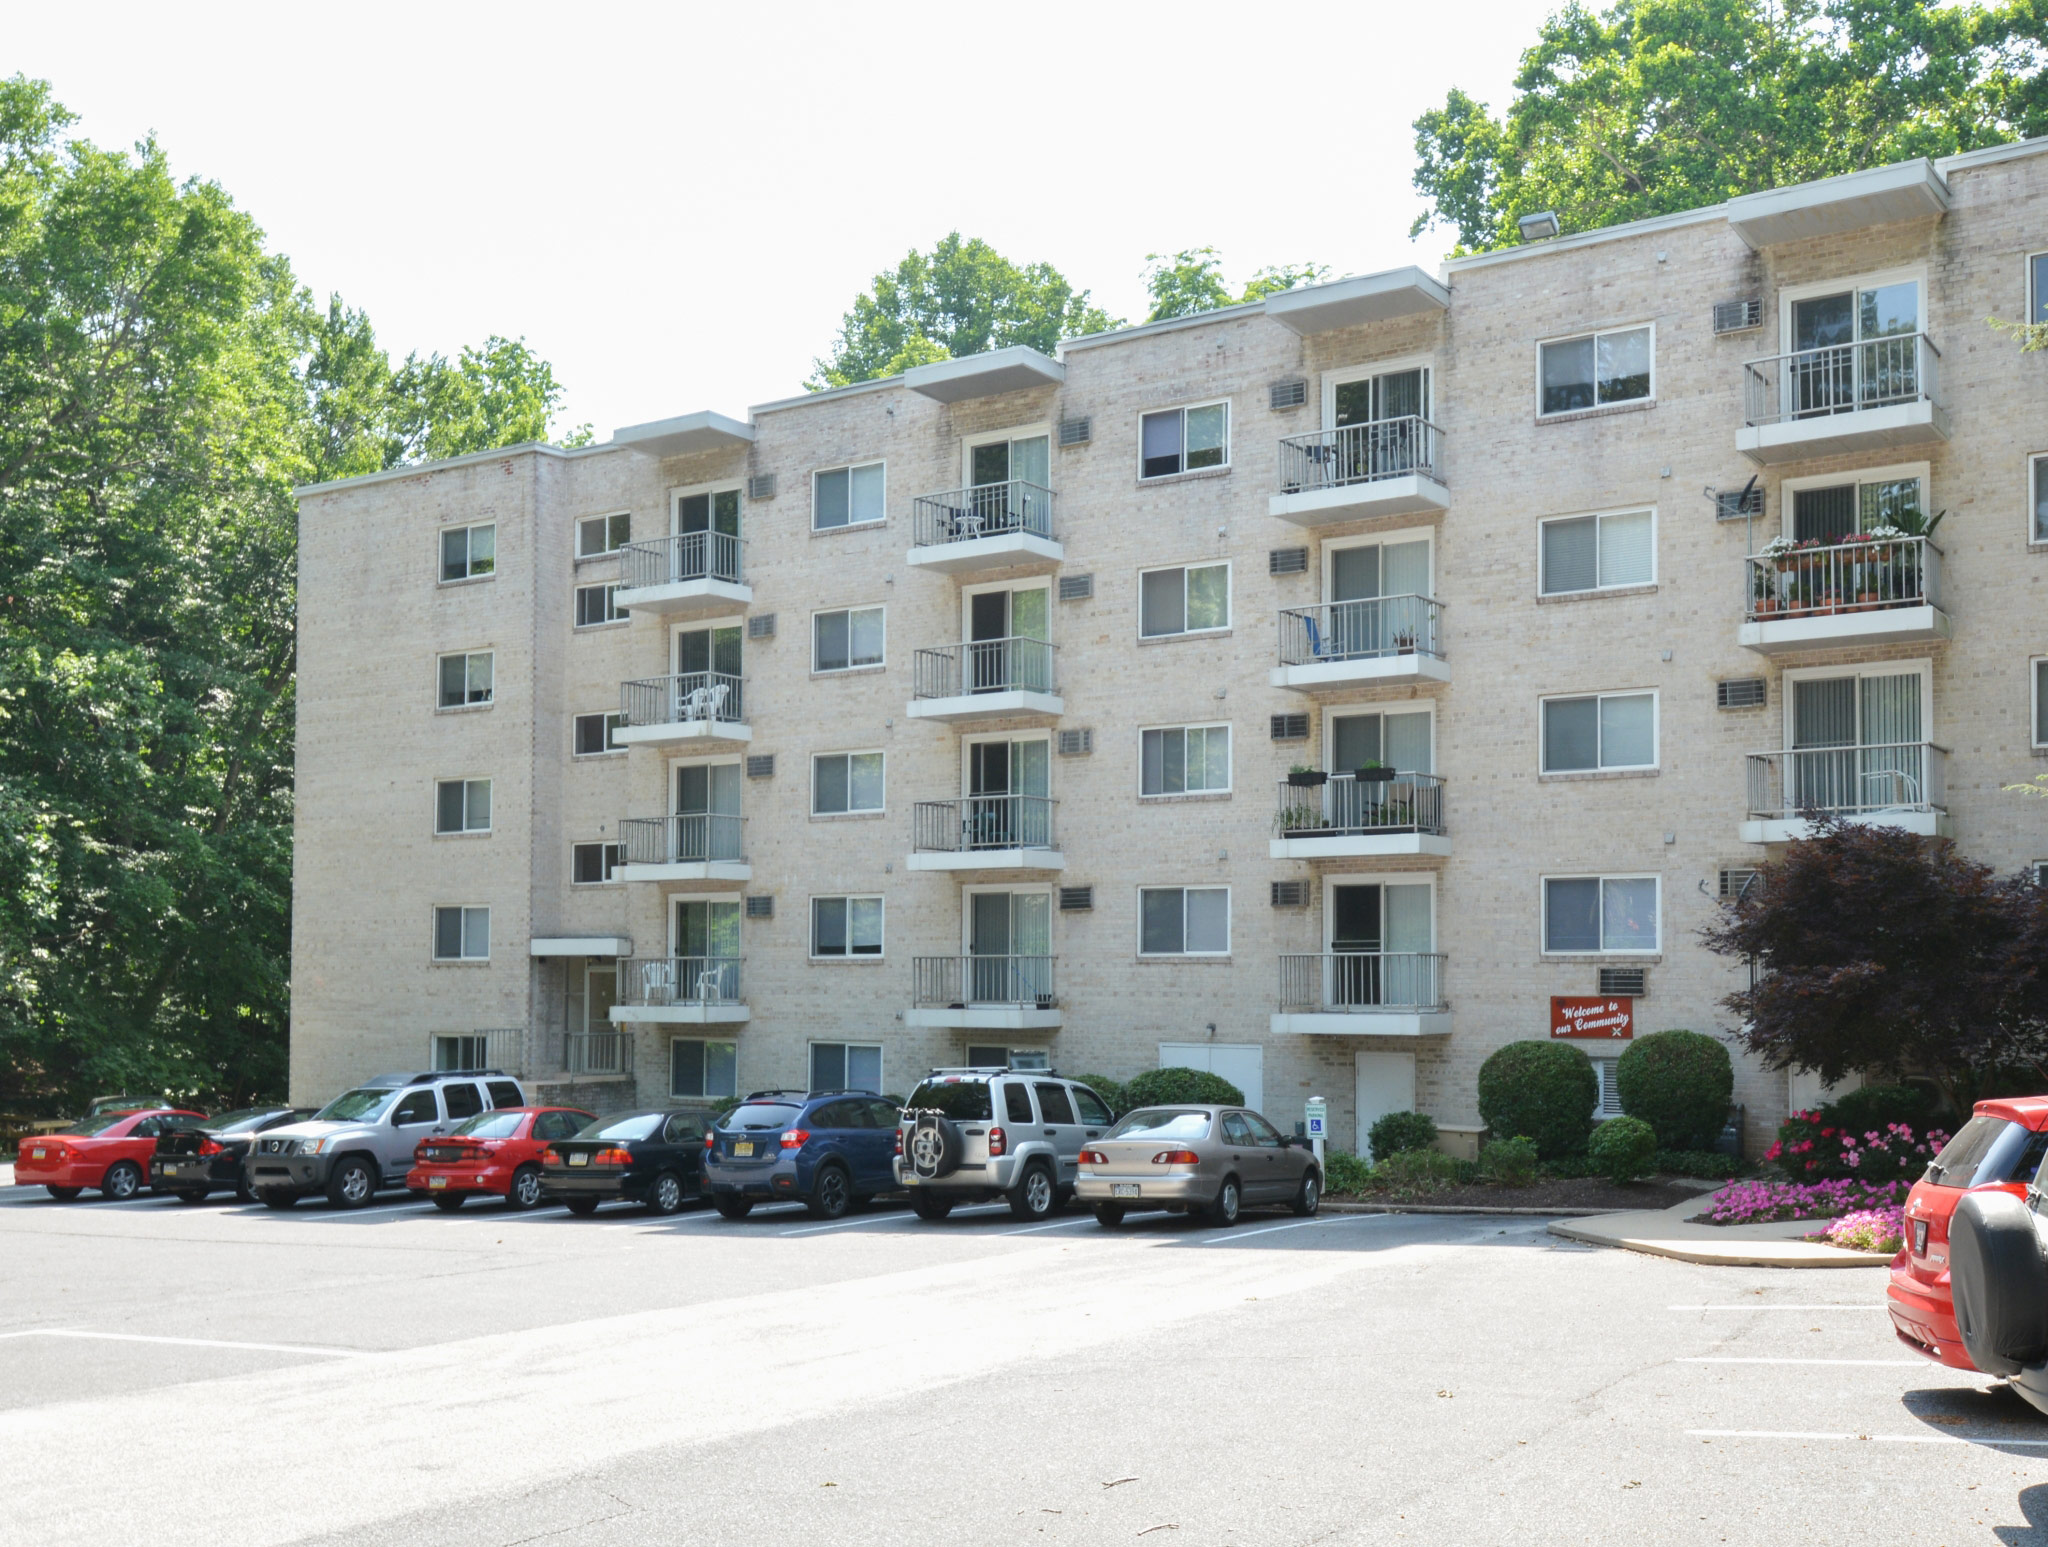 Exterior of an apartment building at Gayley Park, fitted with concrete flooring, paved walkway, and railing